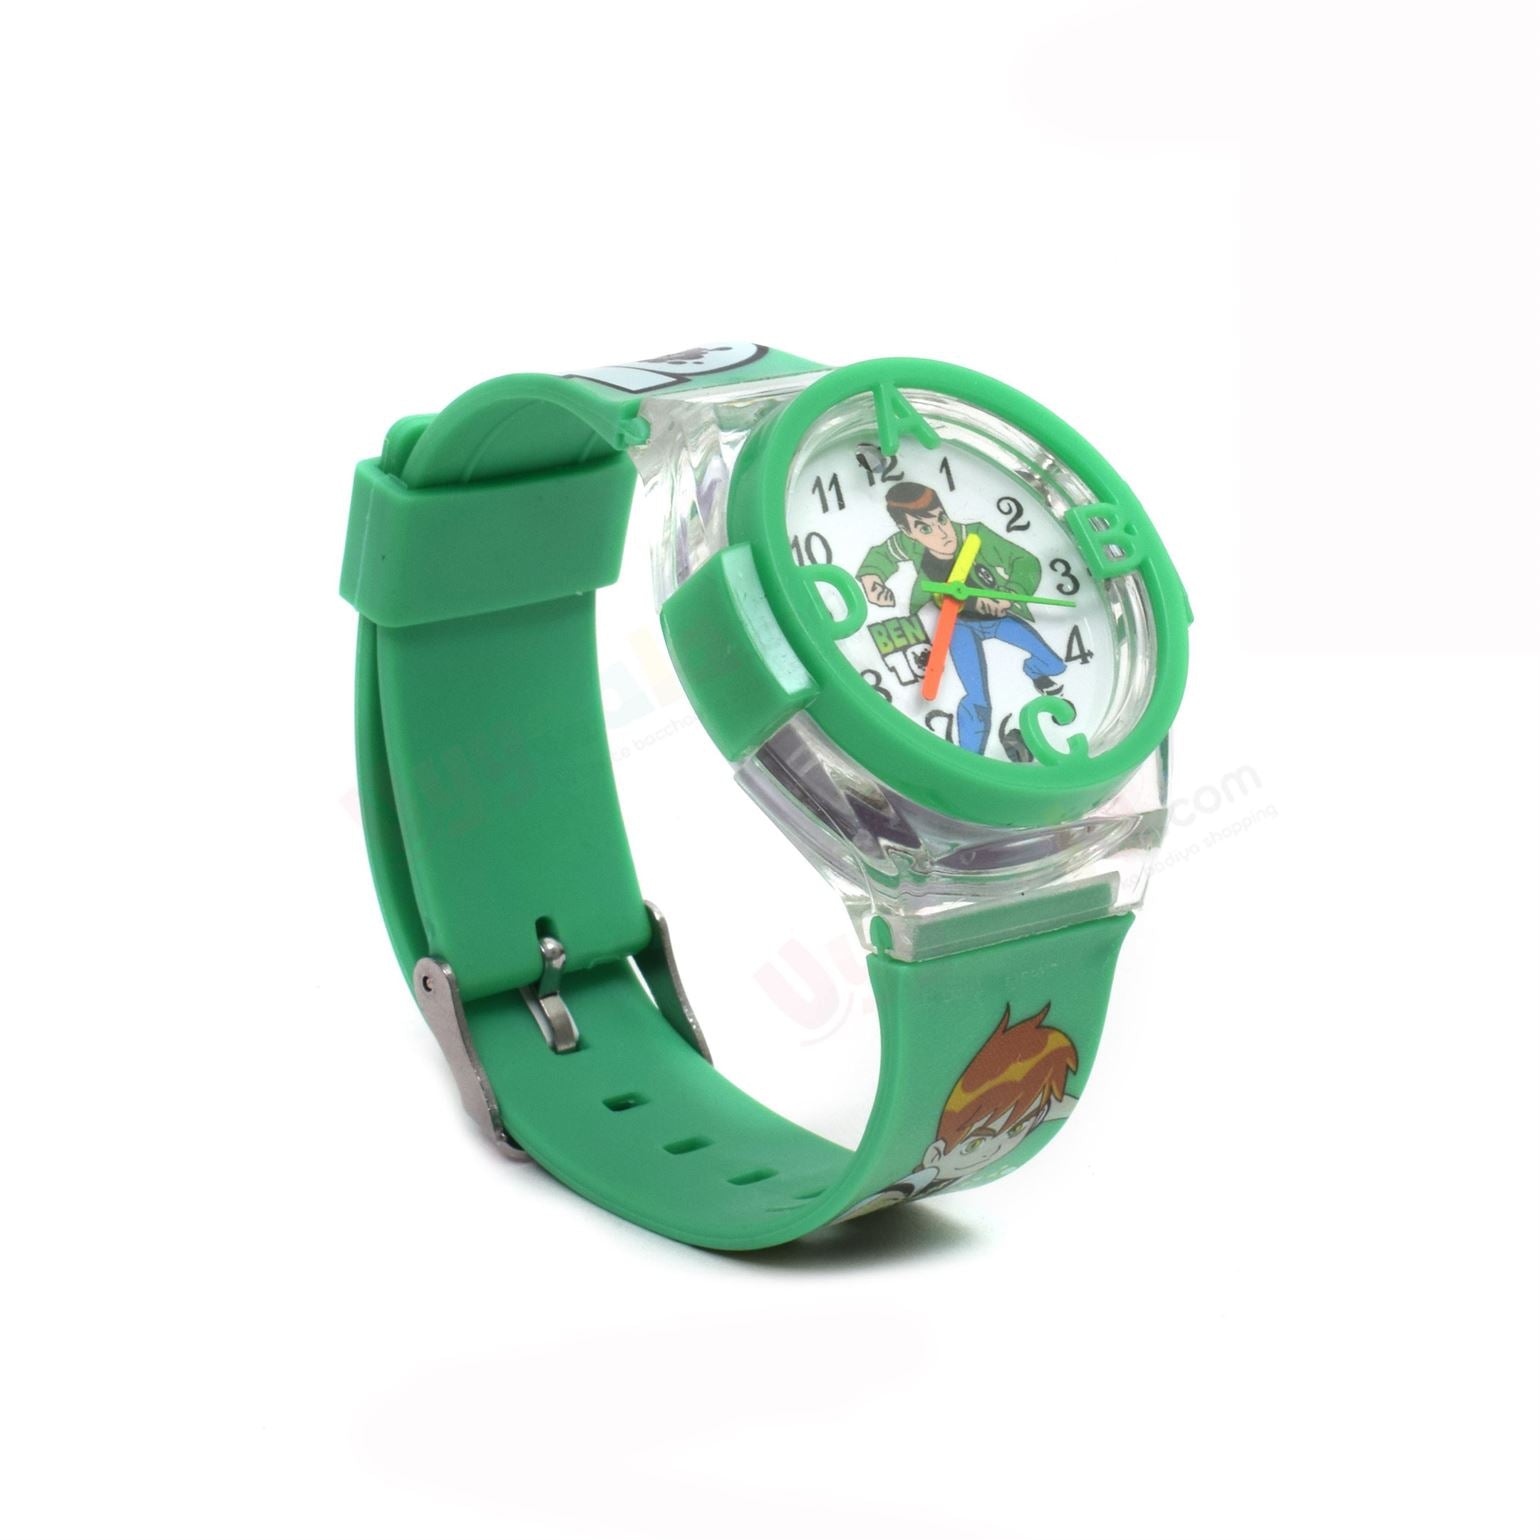 Ben-10 analog watch with led lighting for kids - green strap with ben-10 print, 1 + years